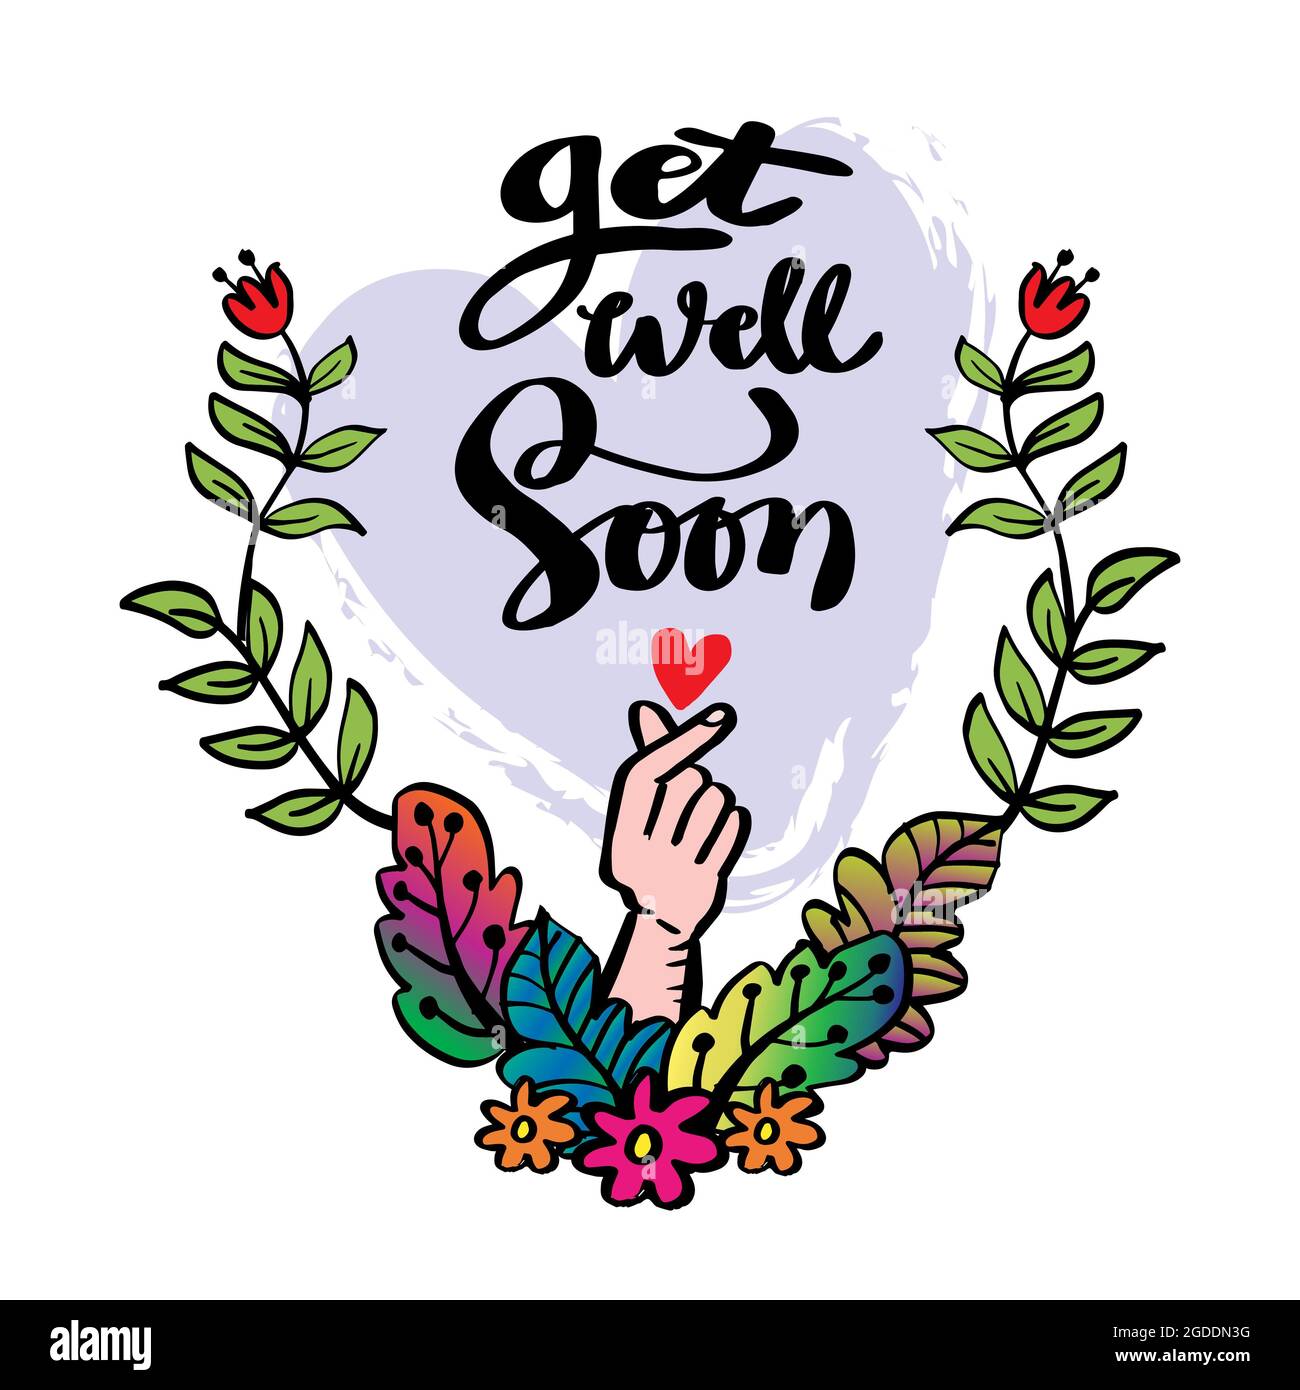 Get well soon hand lettering. Greeting card concept. Stock Photo